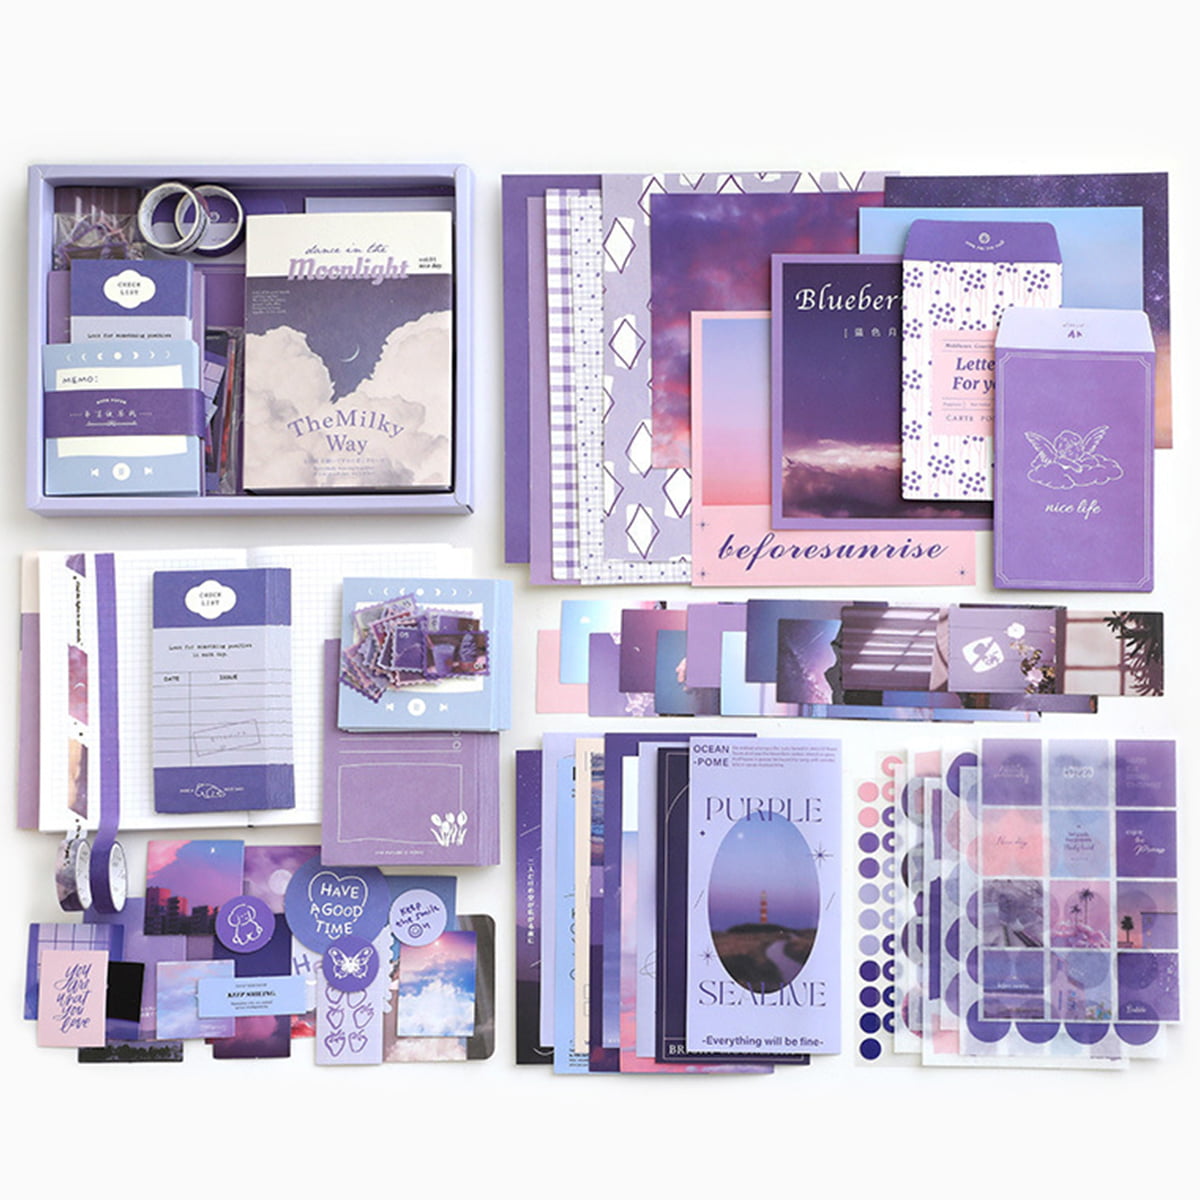 ATopoler Journal Notebook Kit with Diary and DIY Scrapbook Paper